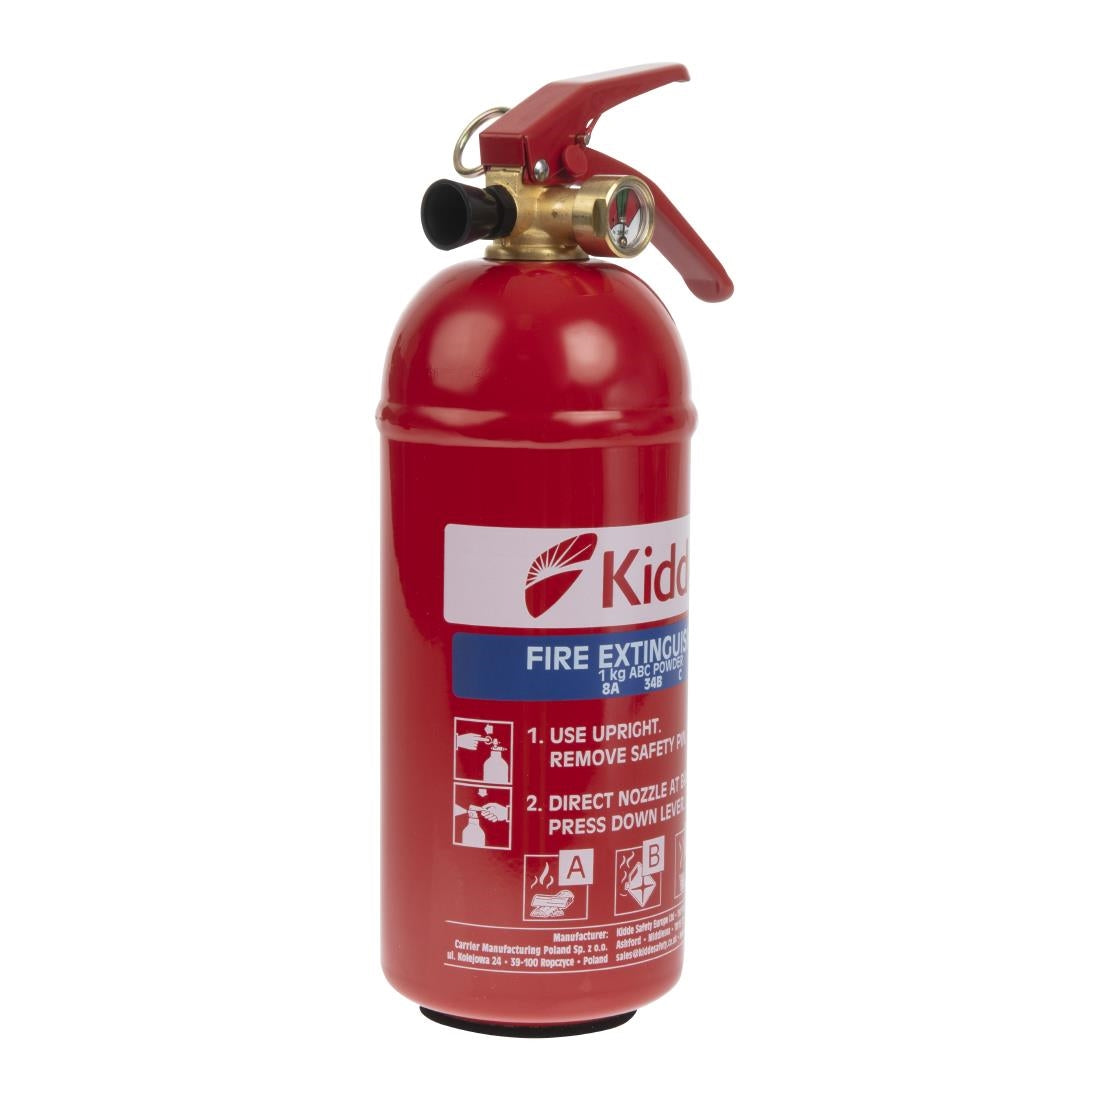 Kidde Multi Purpose Fire Extinguisher (A,B, C and electrical fires) JD Catering Equipment Solutions Ltd